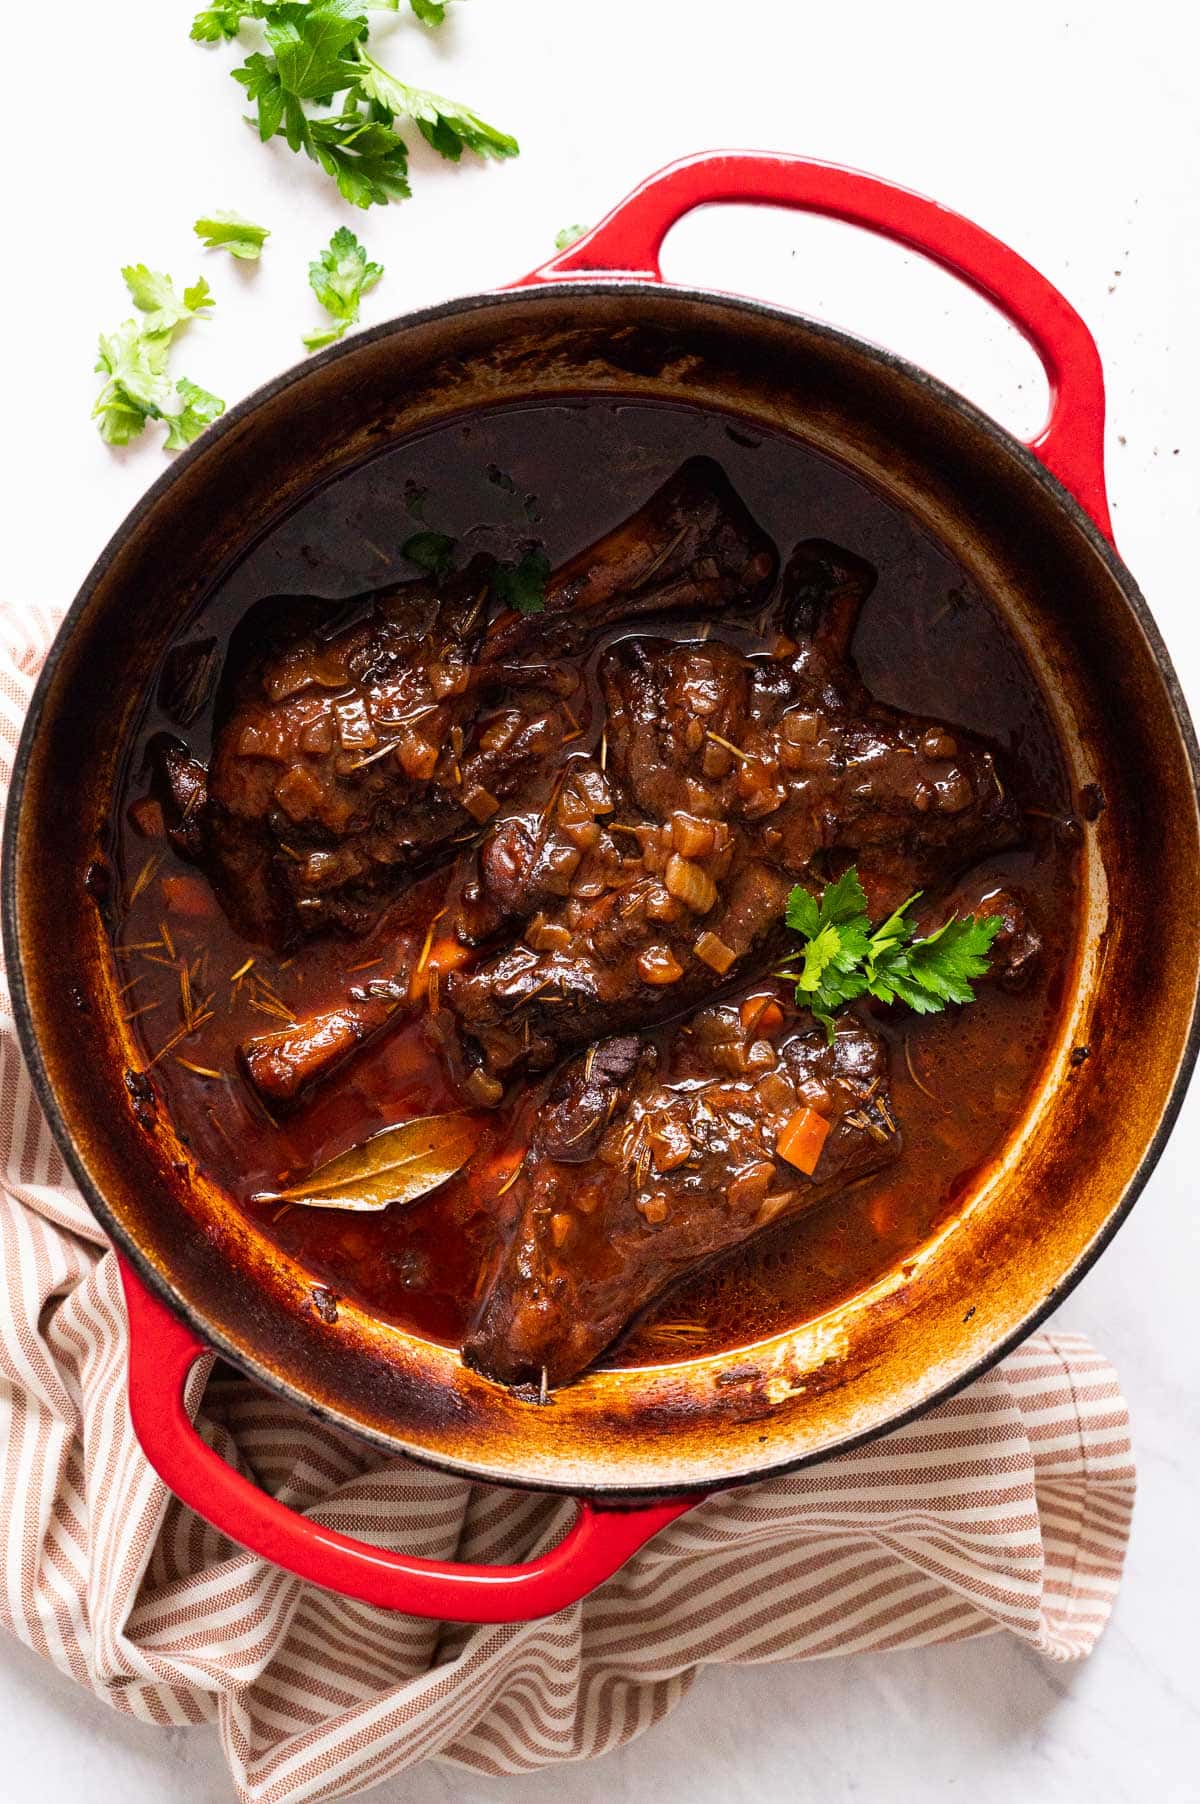 Three braised lamb shanks with gravy and parsley in red dutch oven.